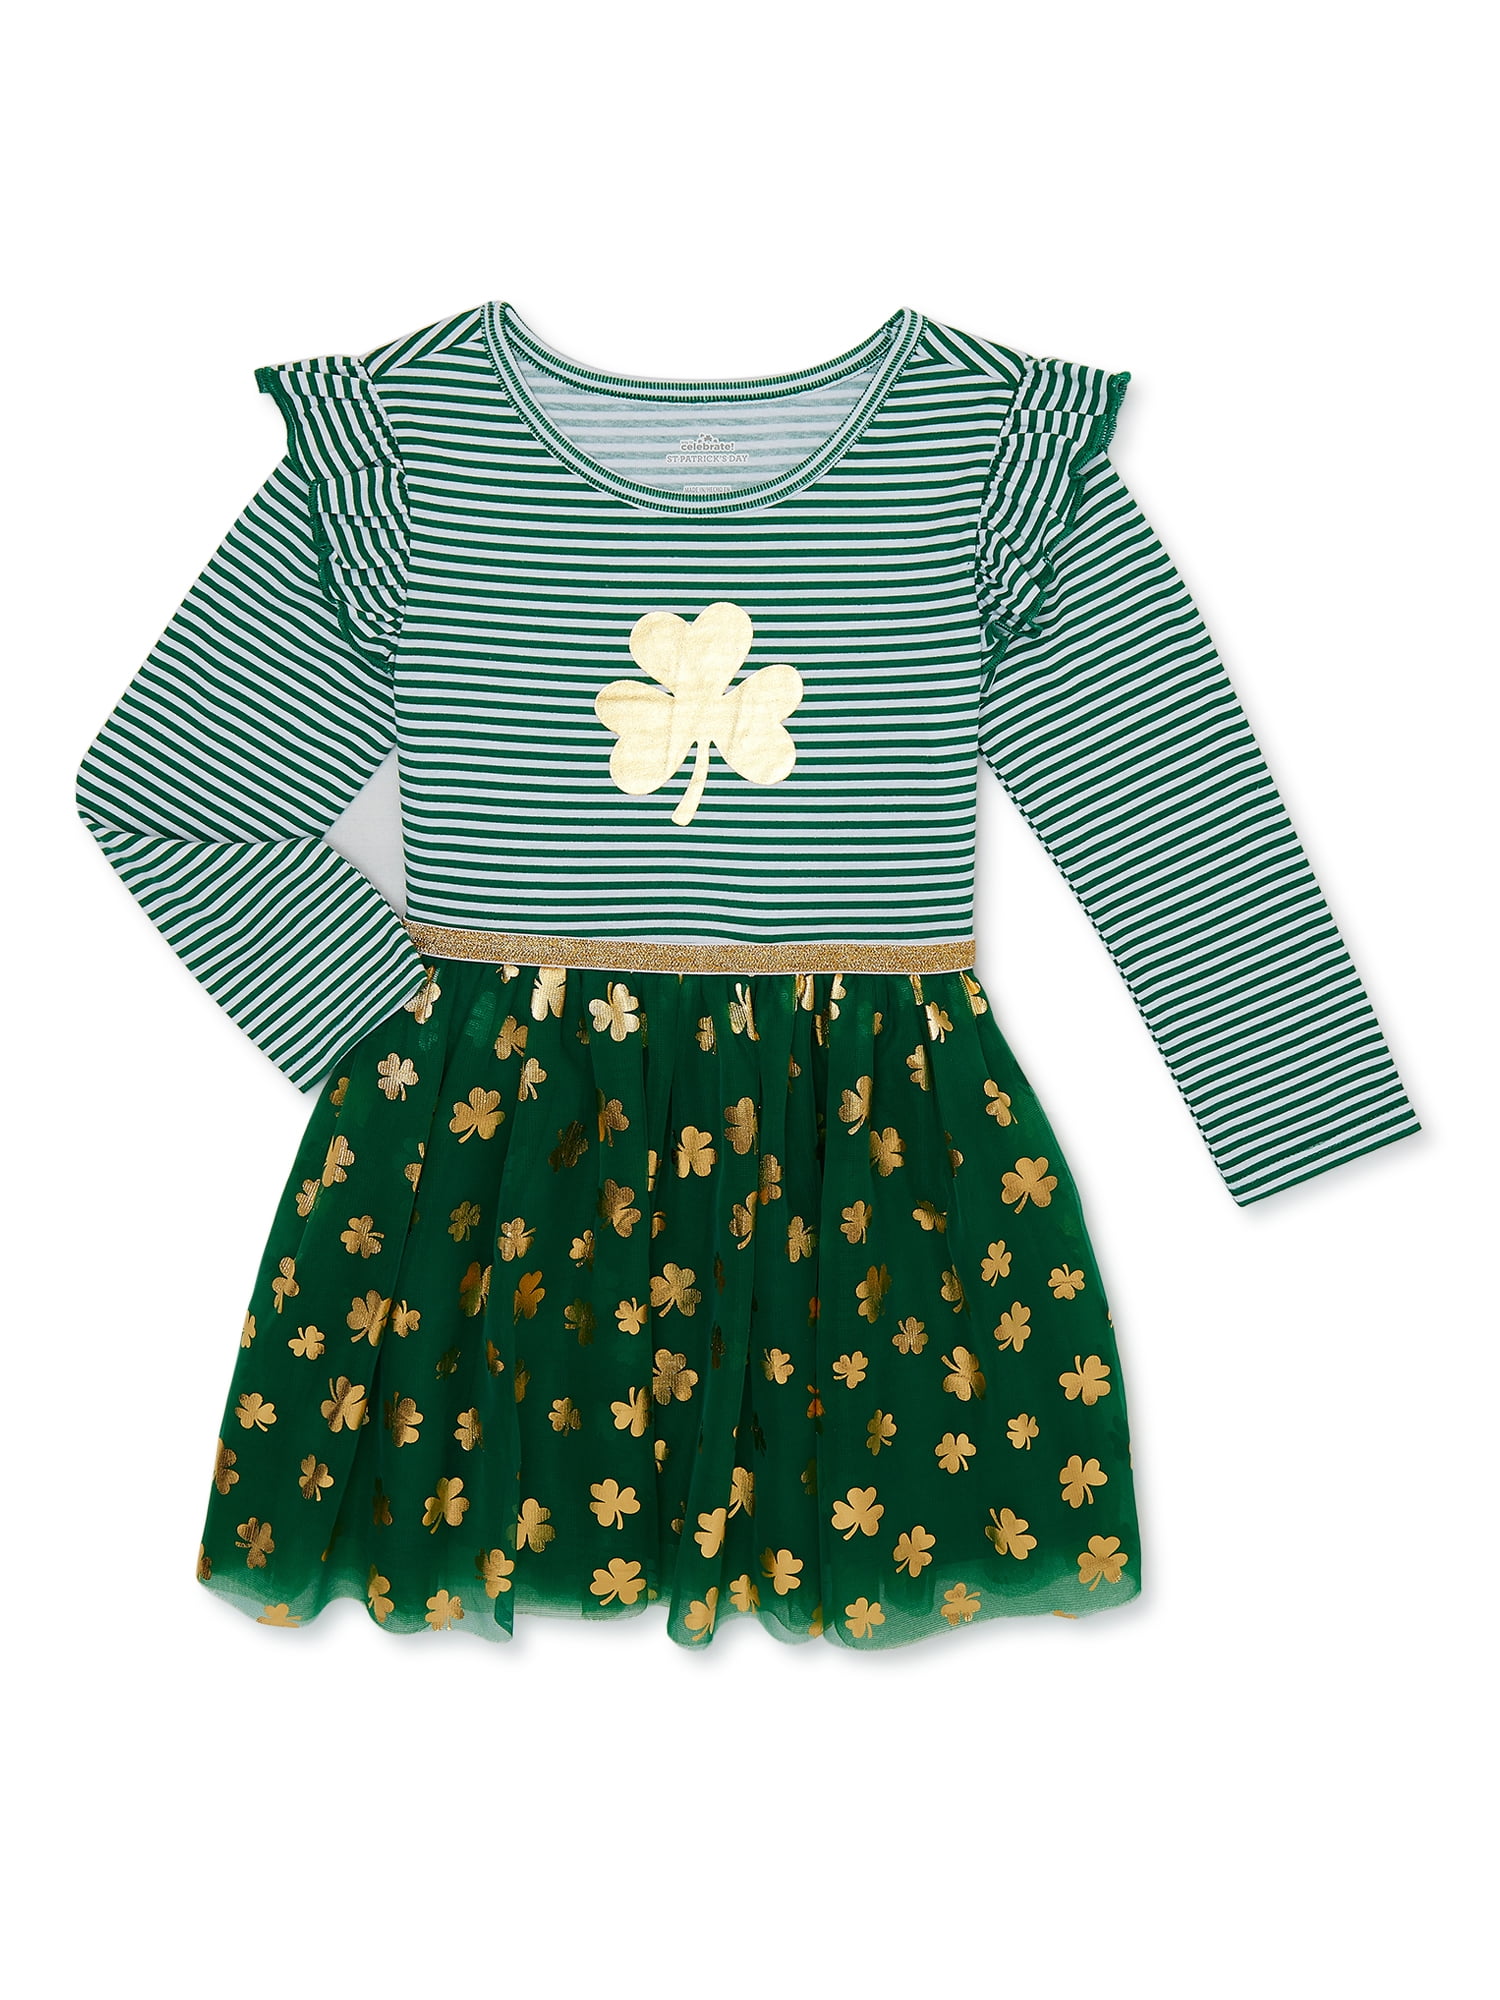 WAY TO CELEBRATE! St. Patrick's Day Baby and Toddler Girls Tutu Dress, Sizes 12M-5T